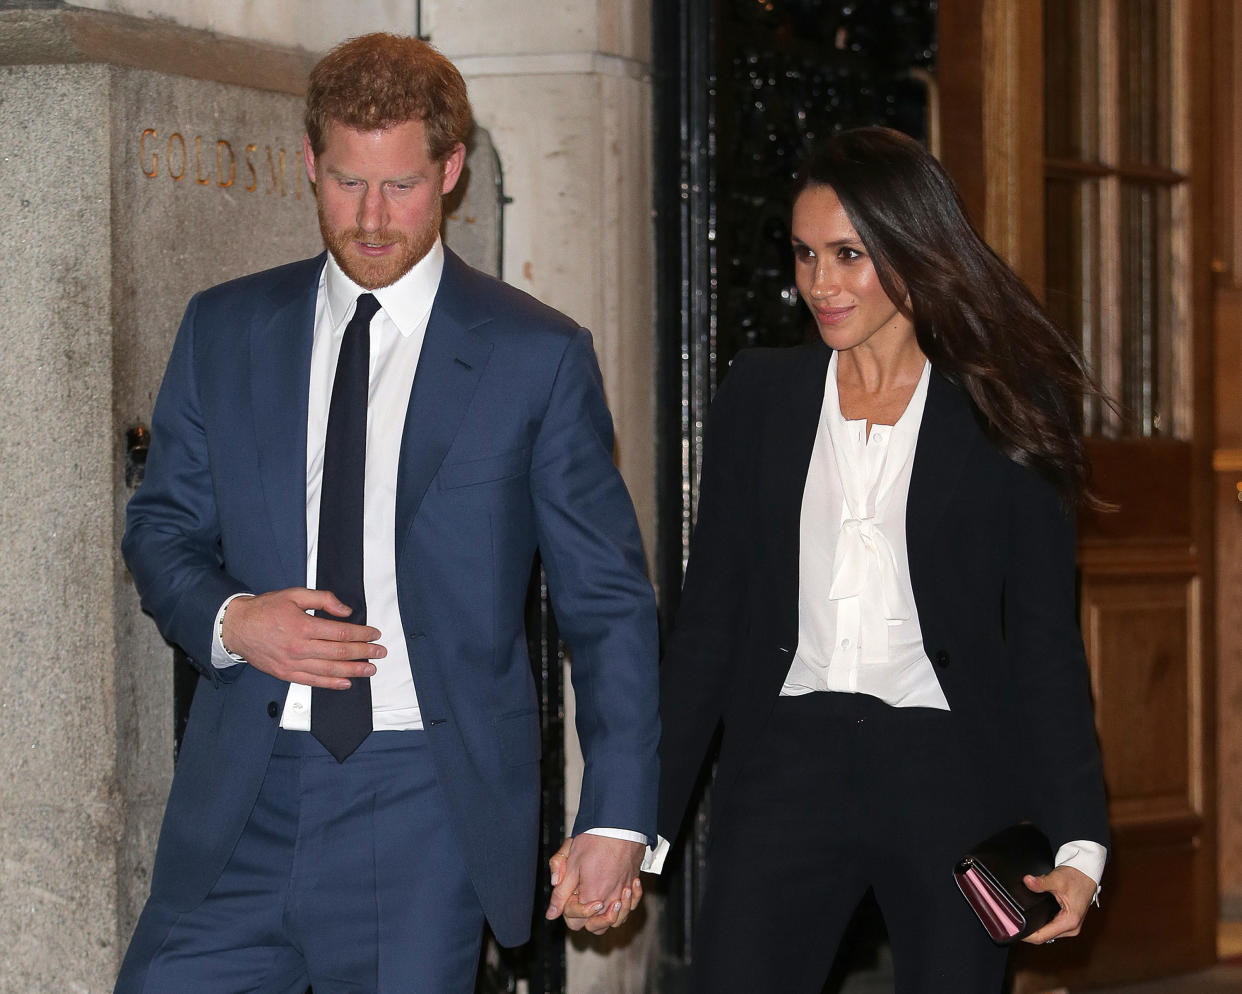 Prince Harry and Meghan Markle are due to wed on May 19th, with their reception being held at Frogmore House [Photo: Getty]